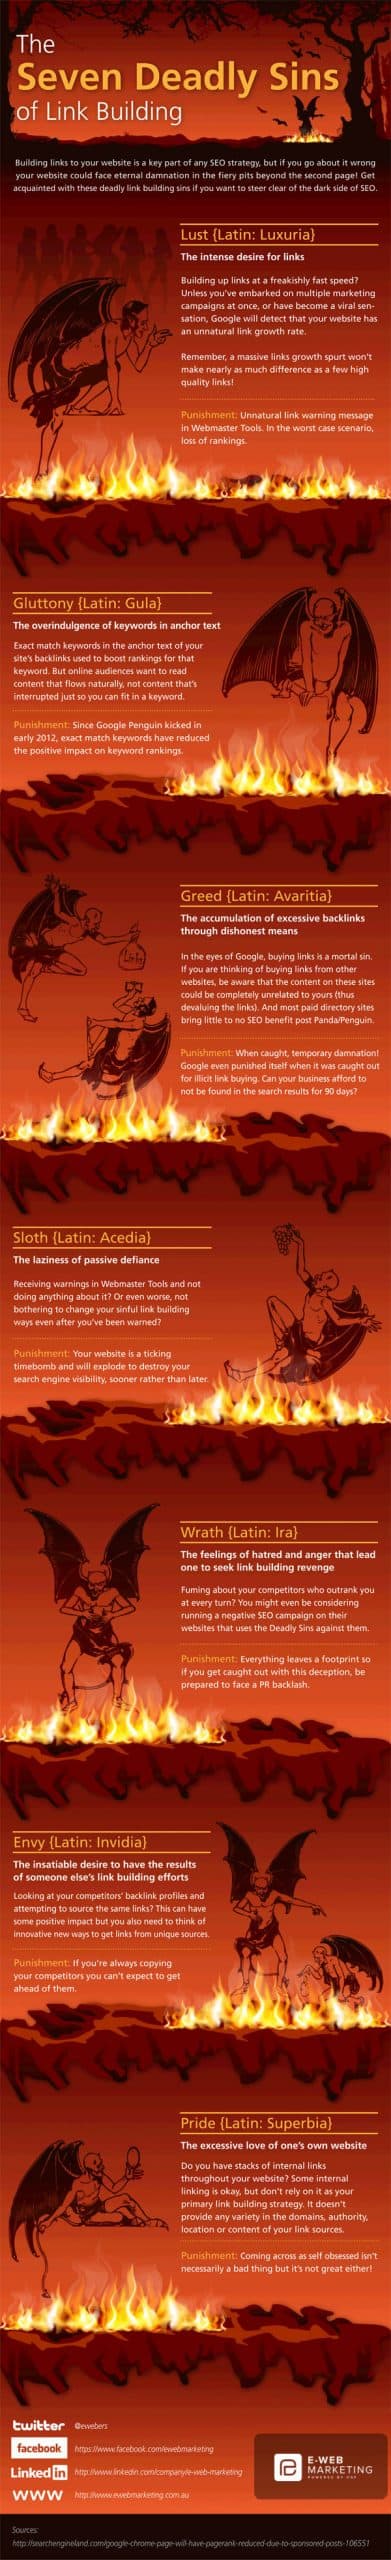 Seven Deadly Sins of Link Building Infographic